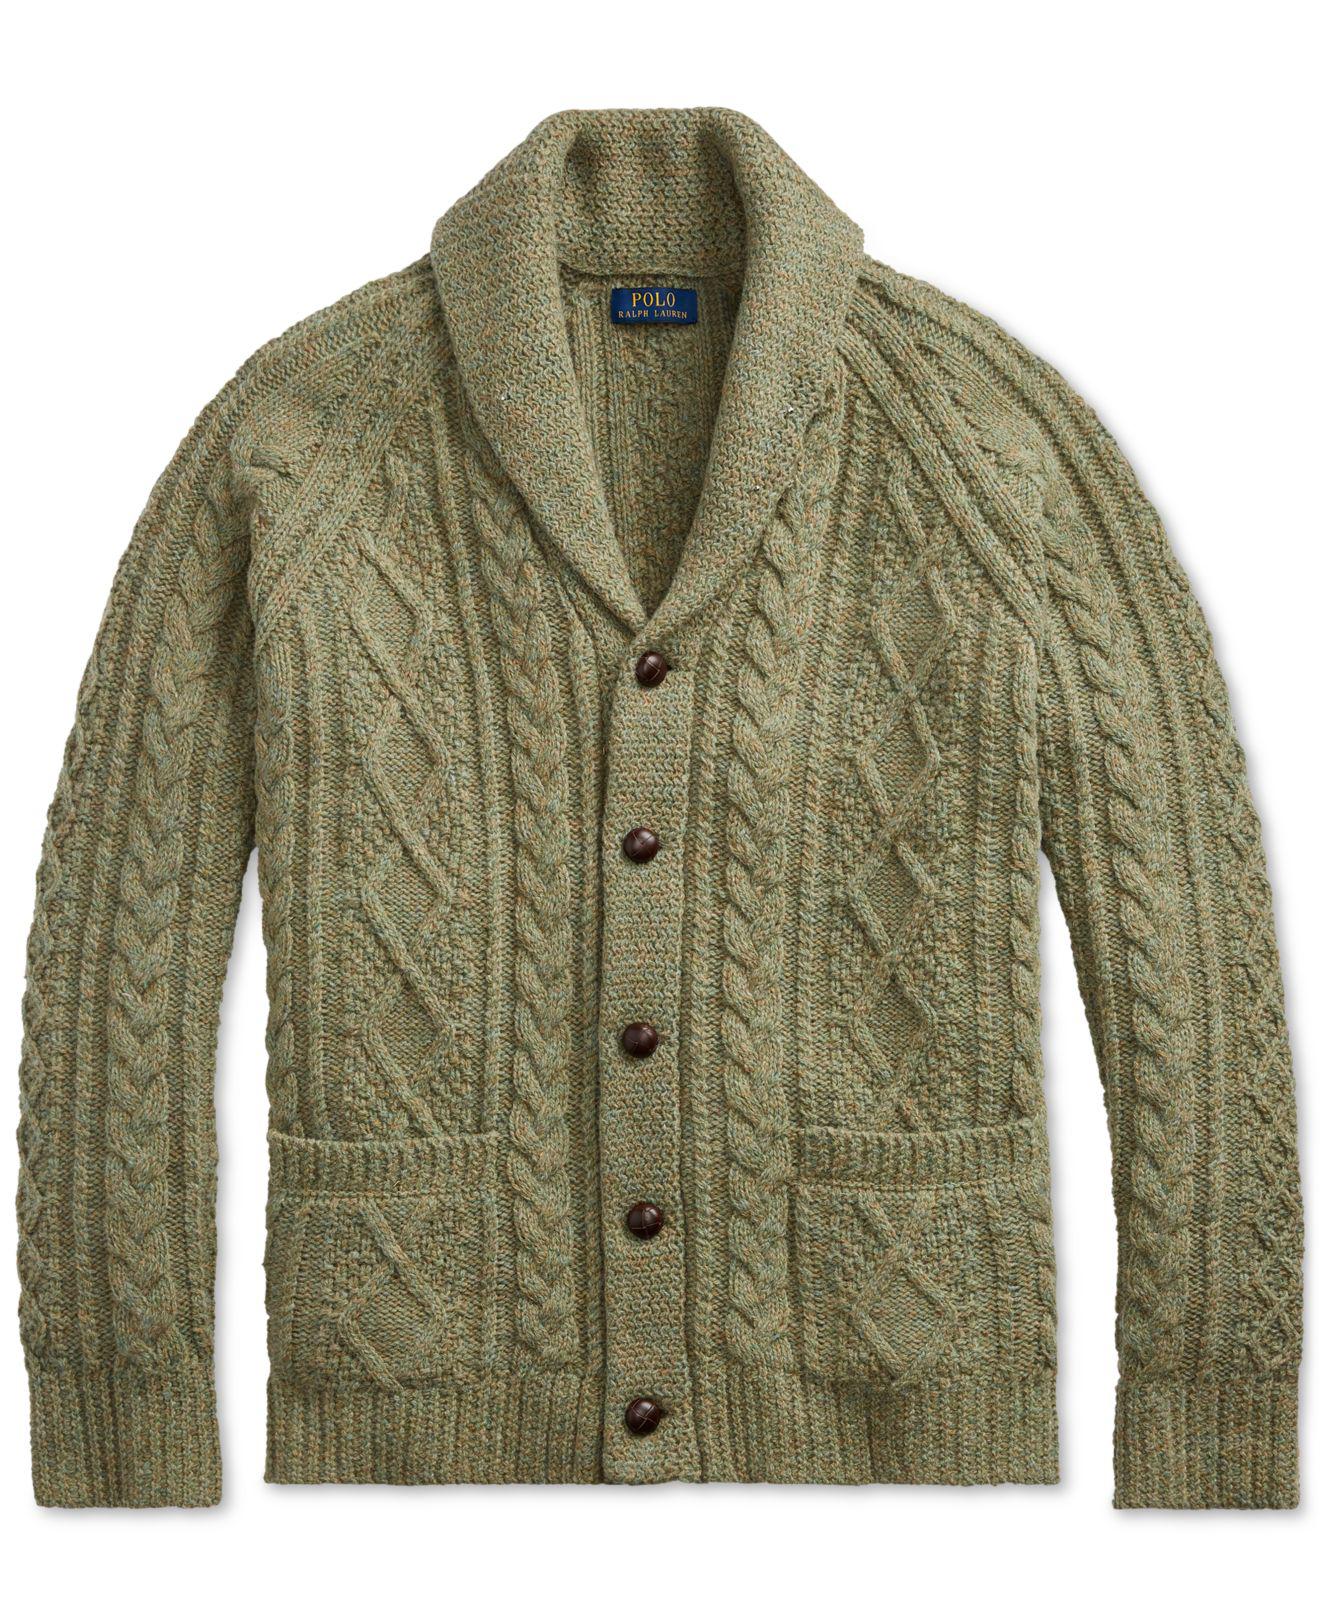 Polo Ralph Lauren Cable Wool-cashmere Cardigan in Blue/White 